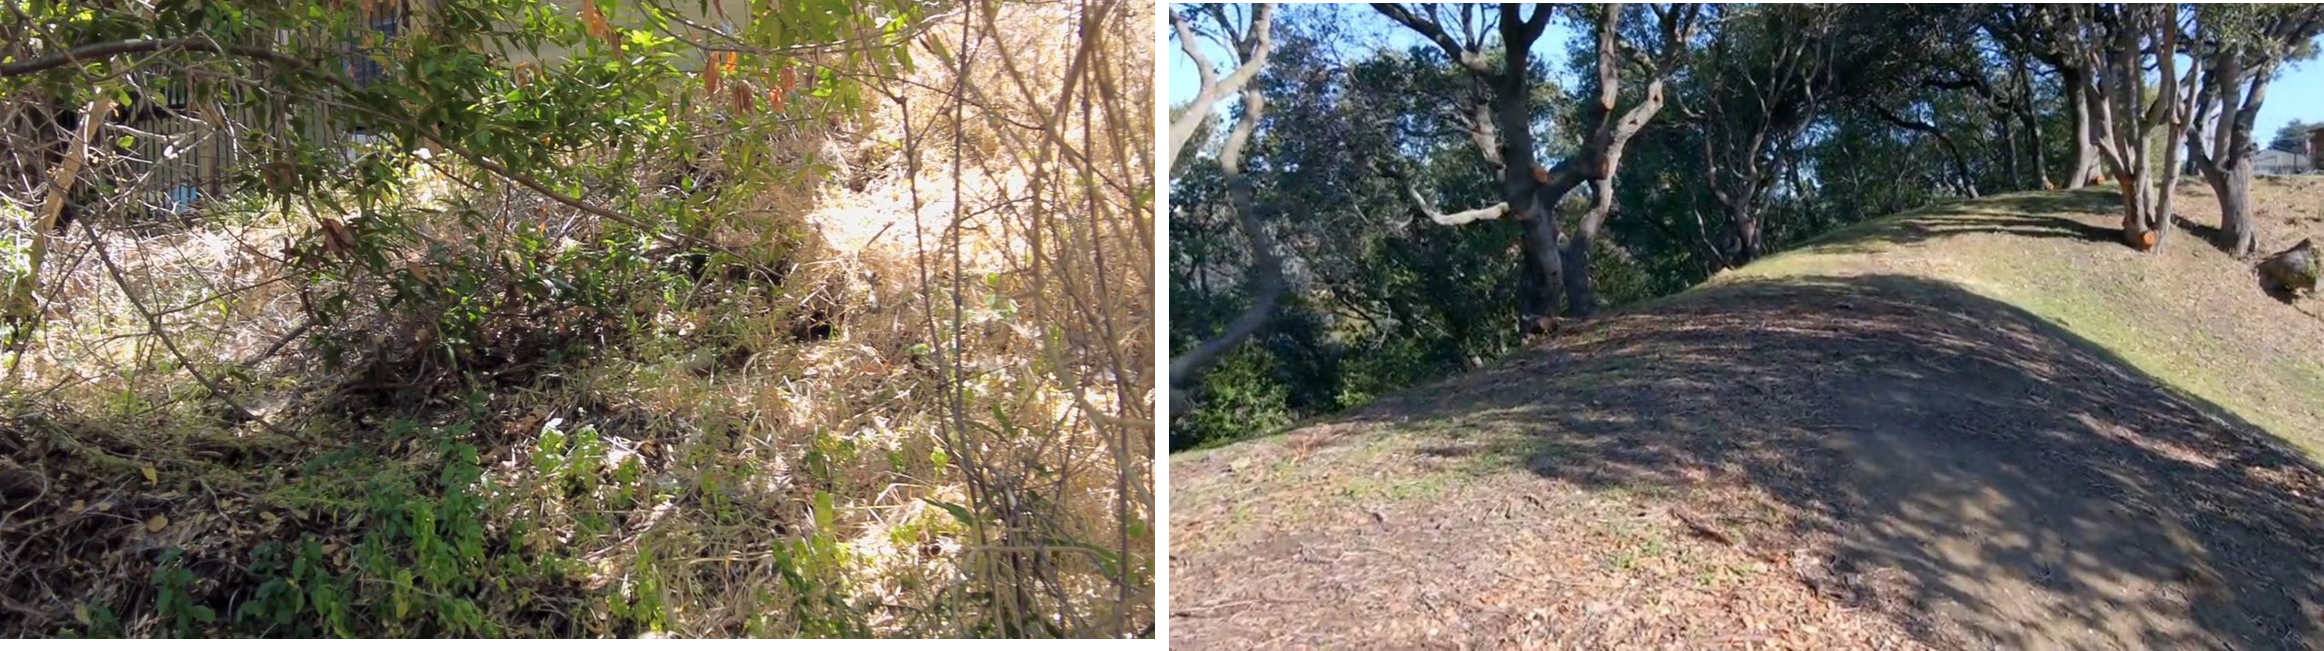 Defensible space project before and after of Memorial Park